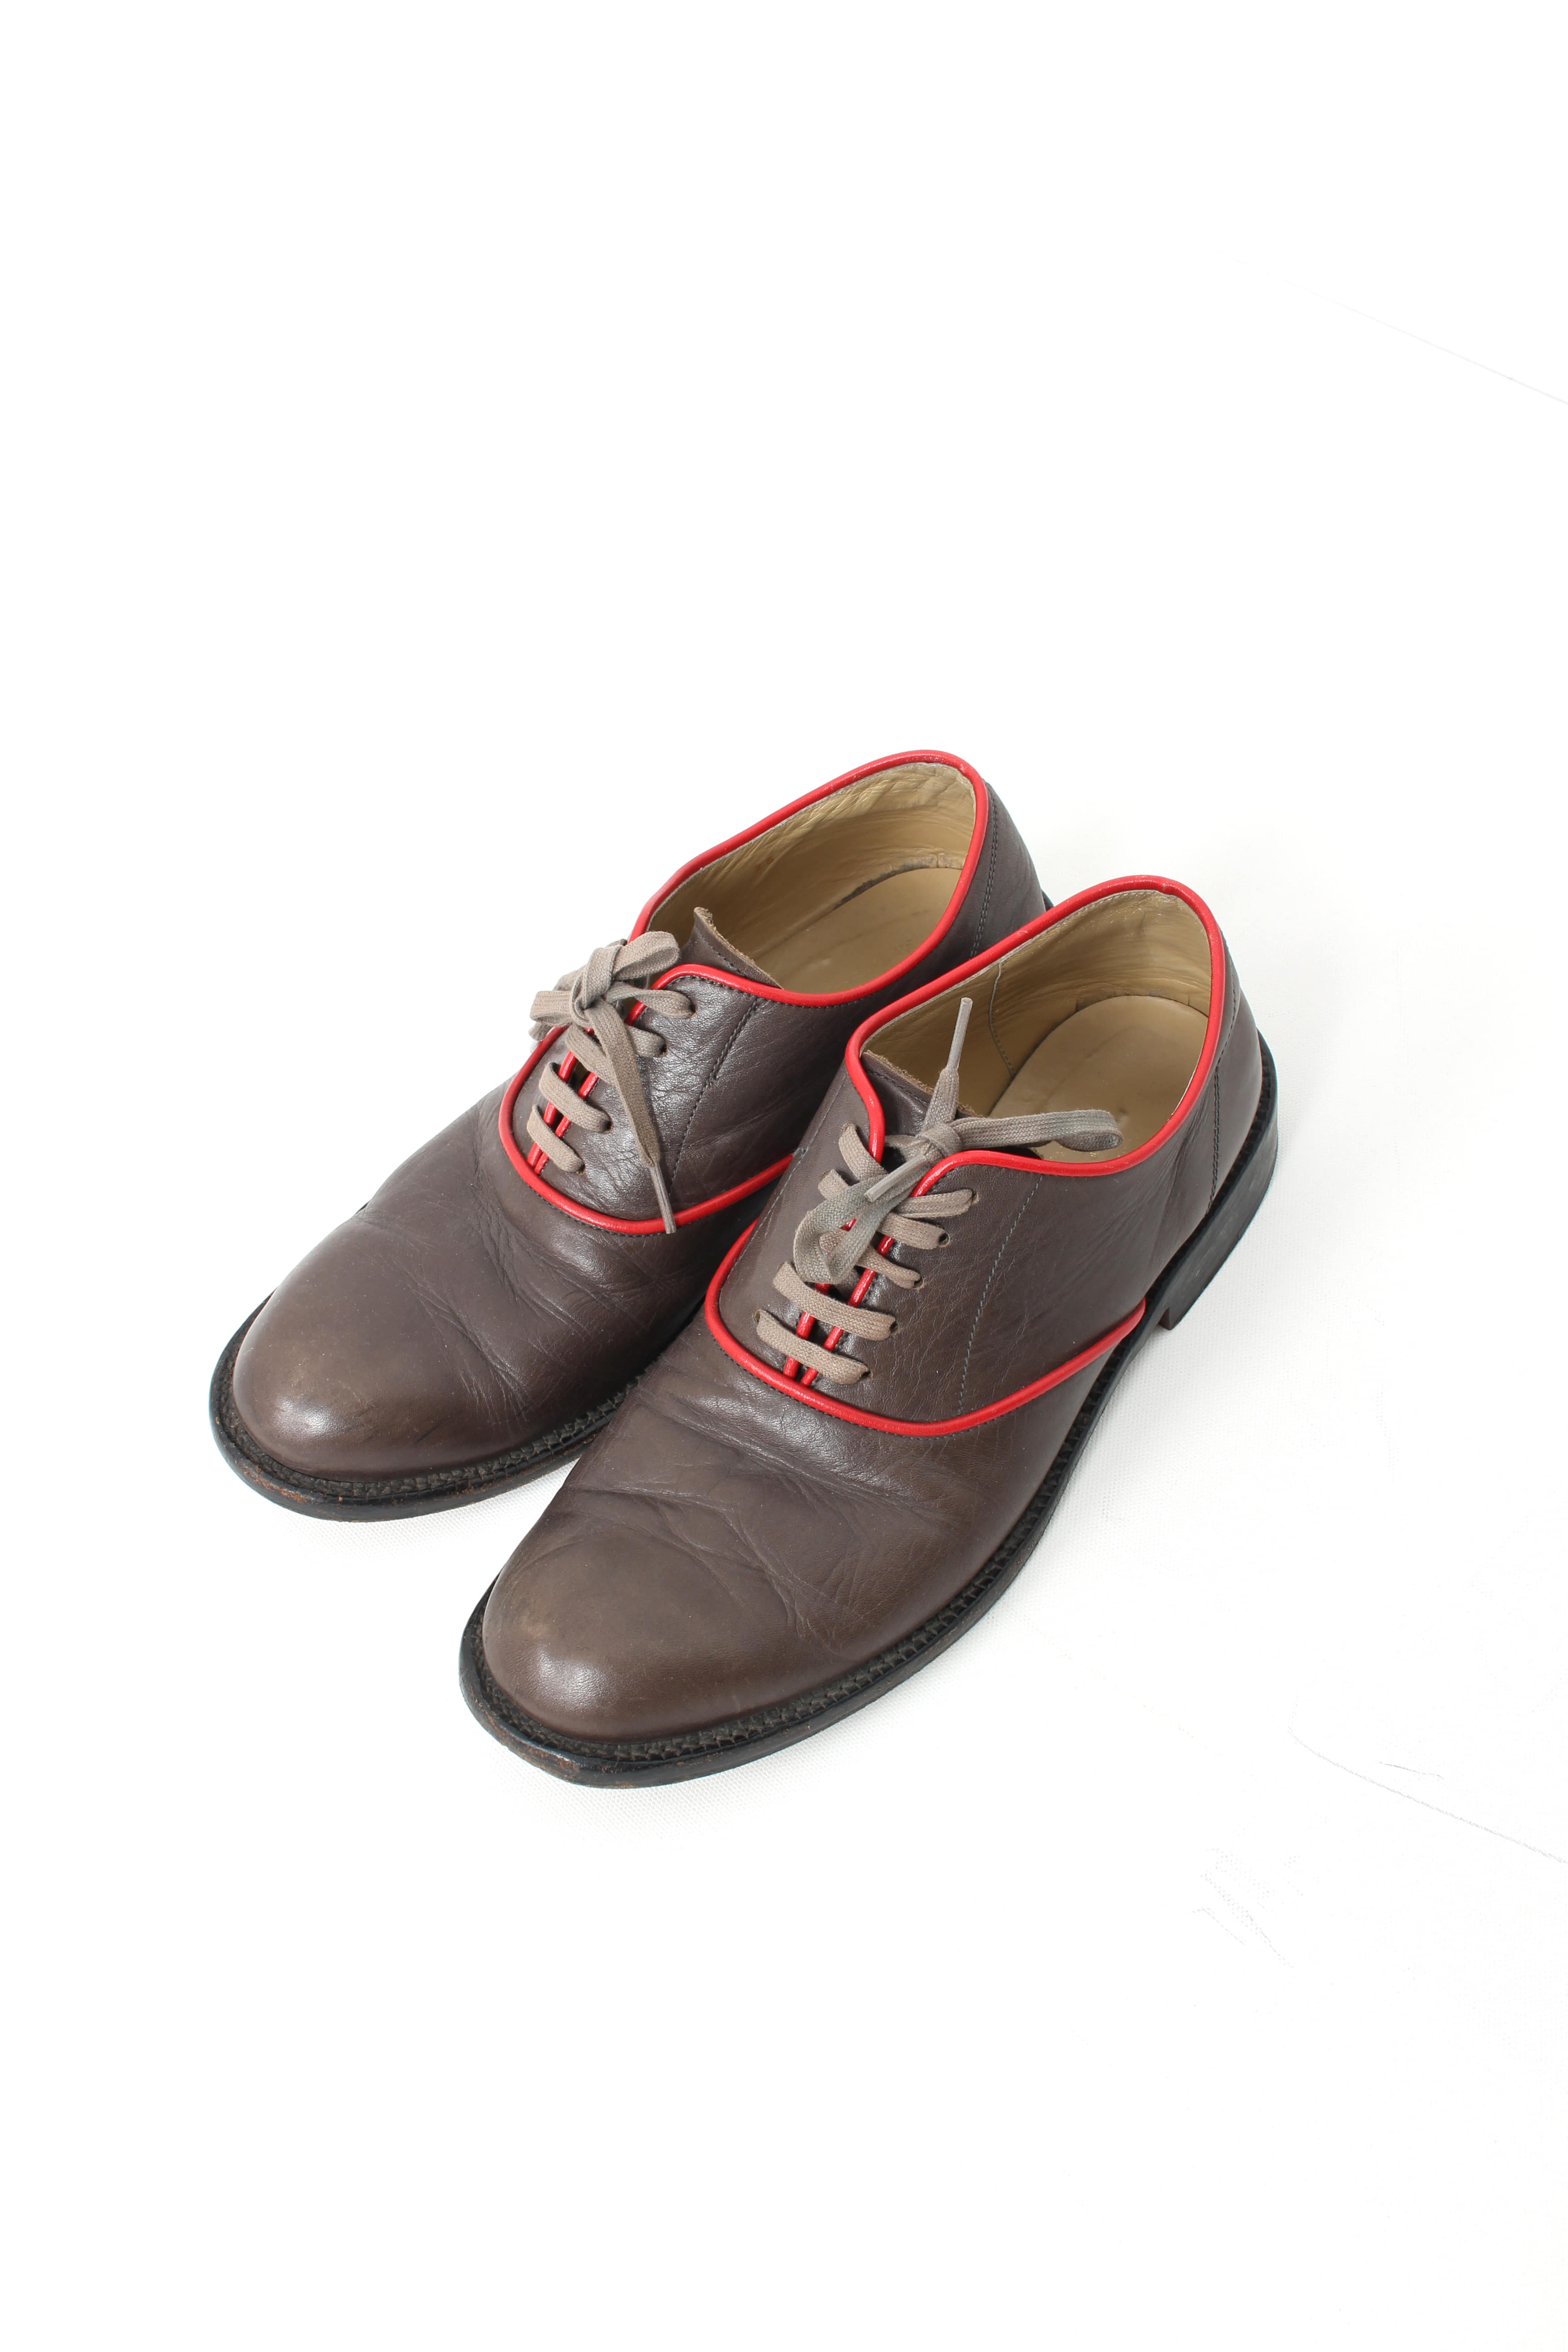 COMME des GARCONS Piping Shoes(250)